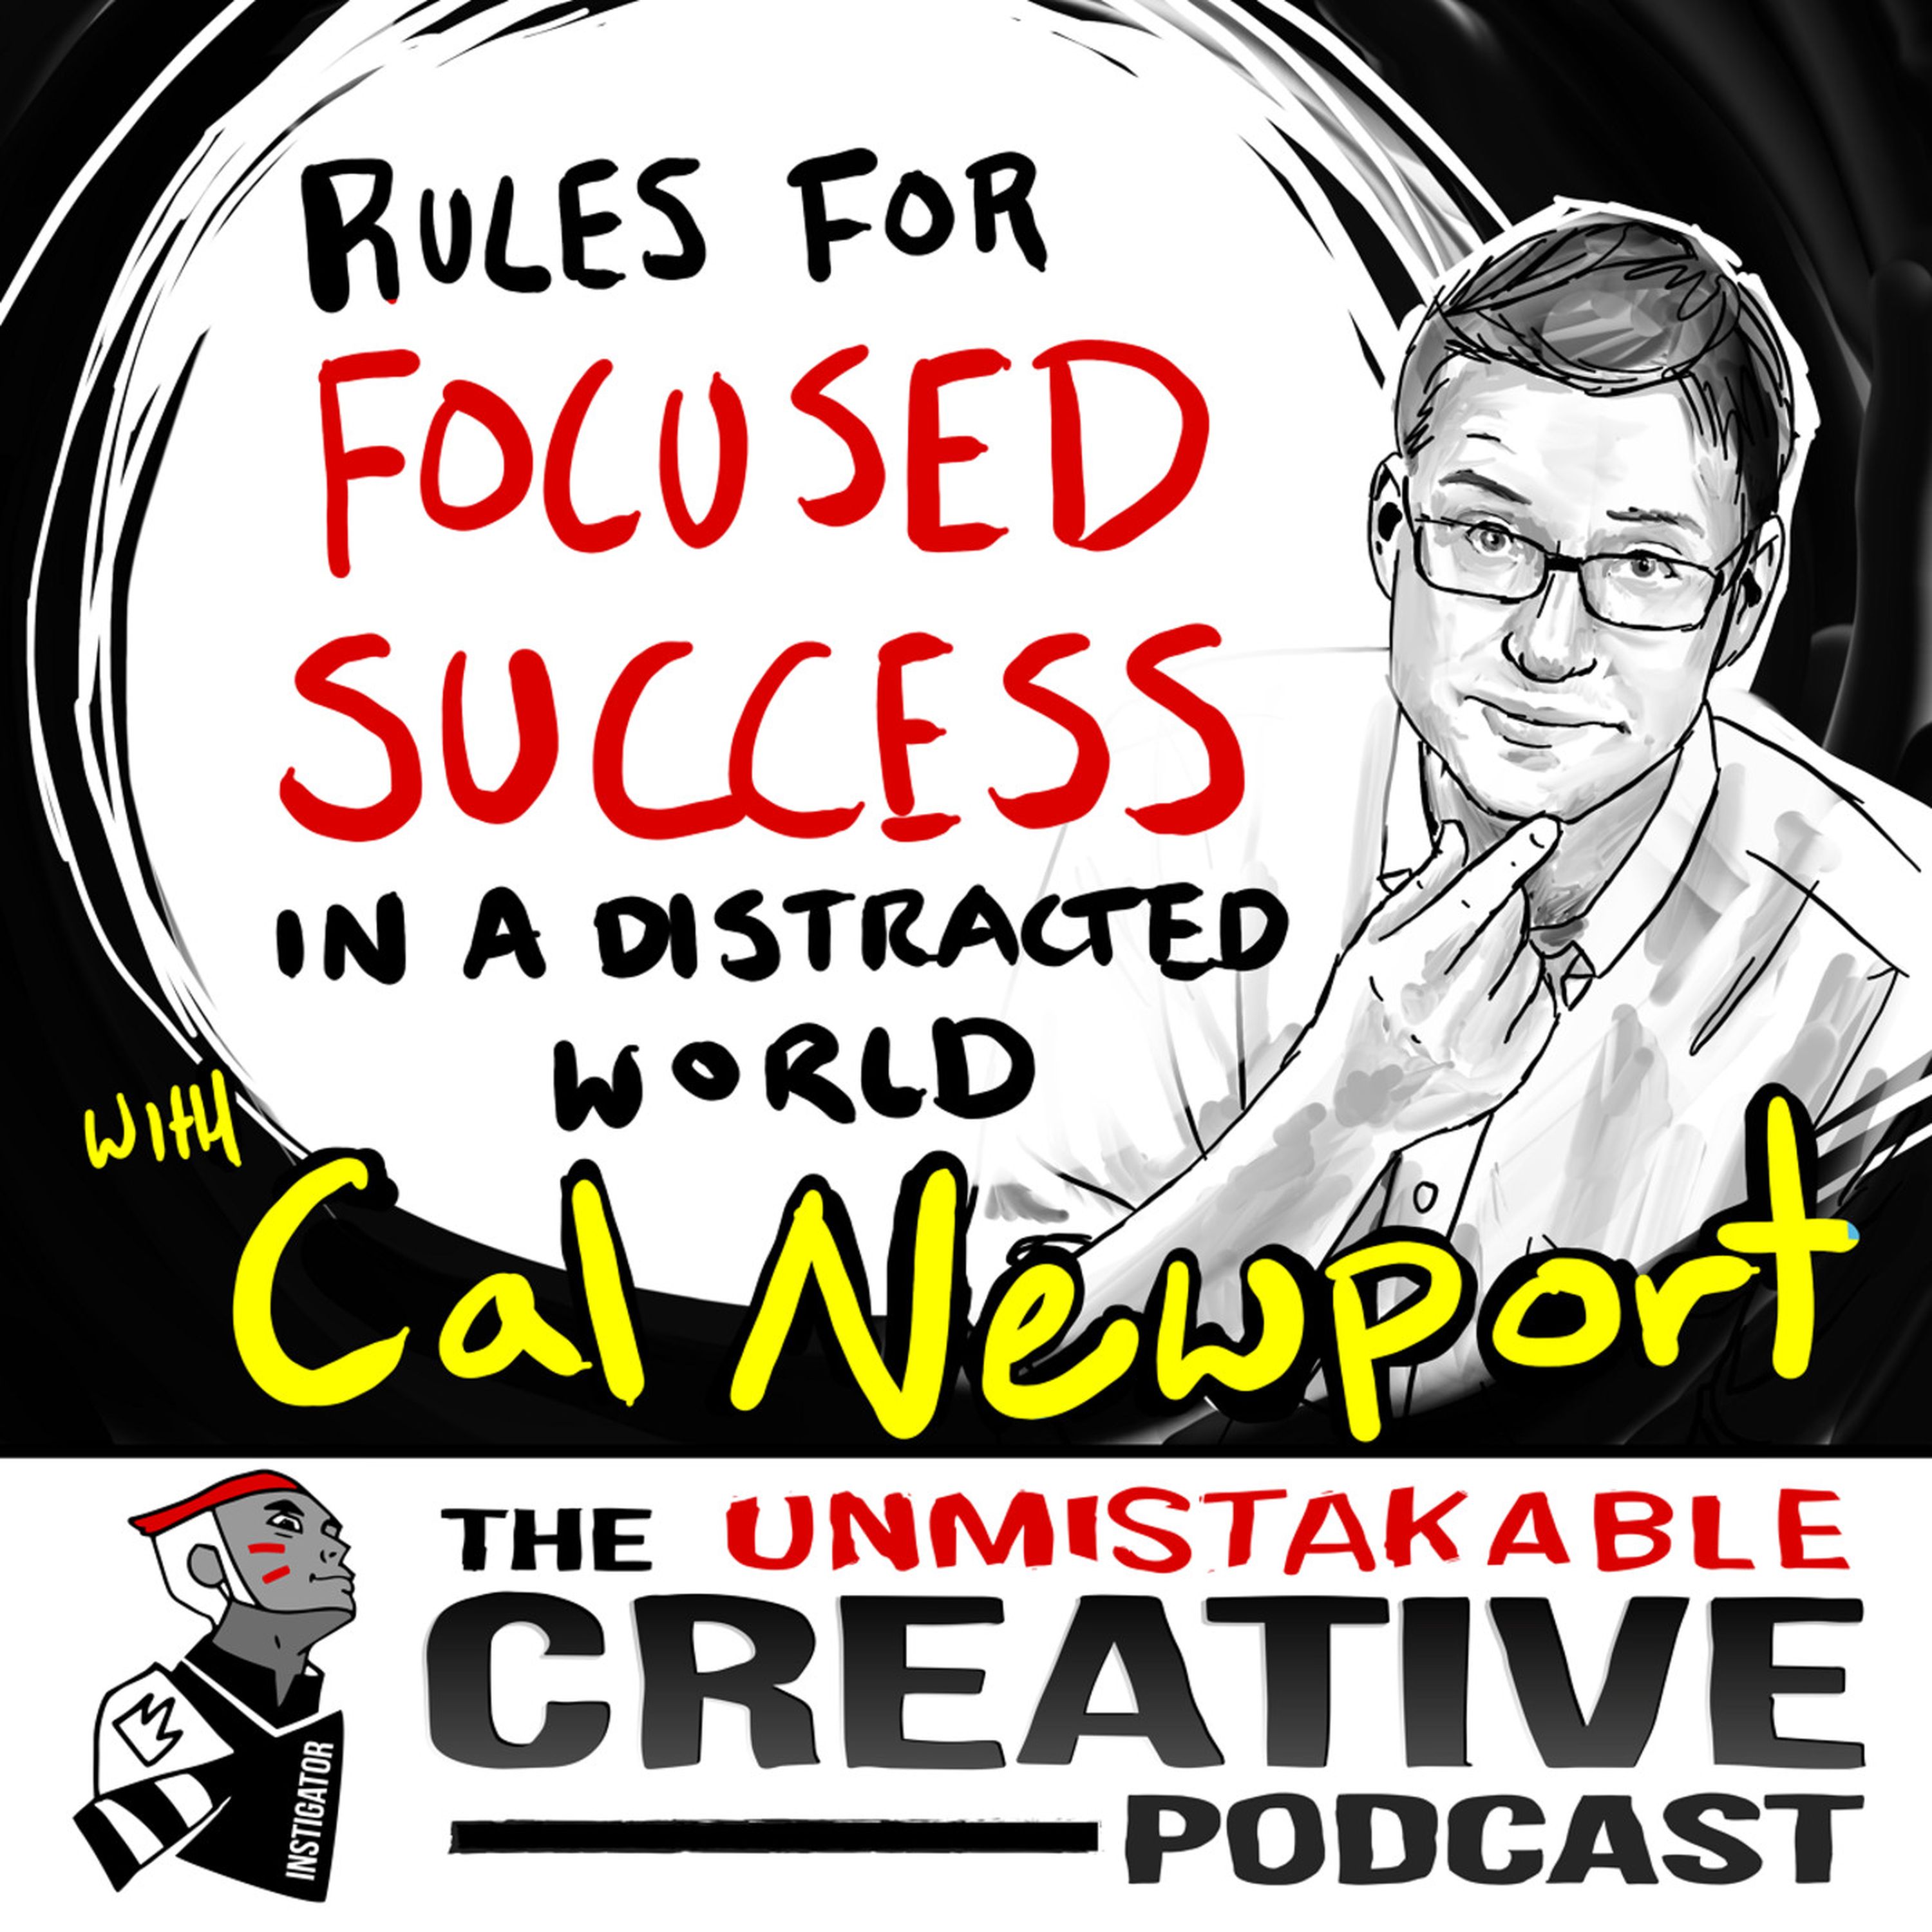 Rules for Focused Success in a Distracted World with Cal Newport Image